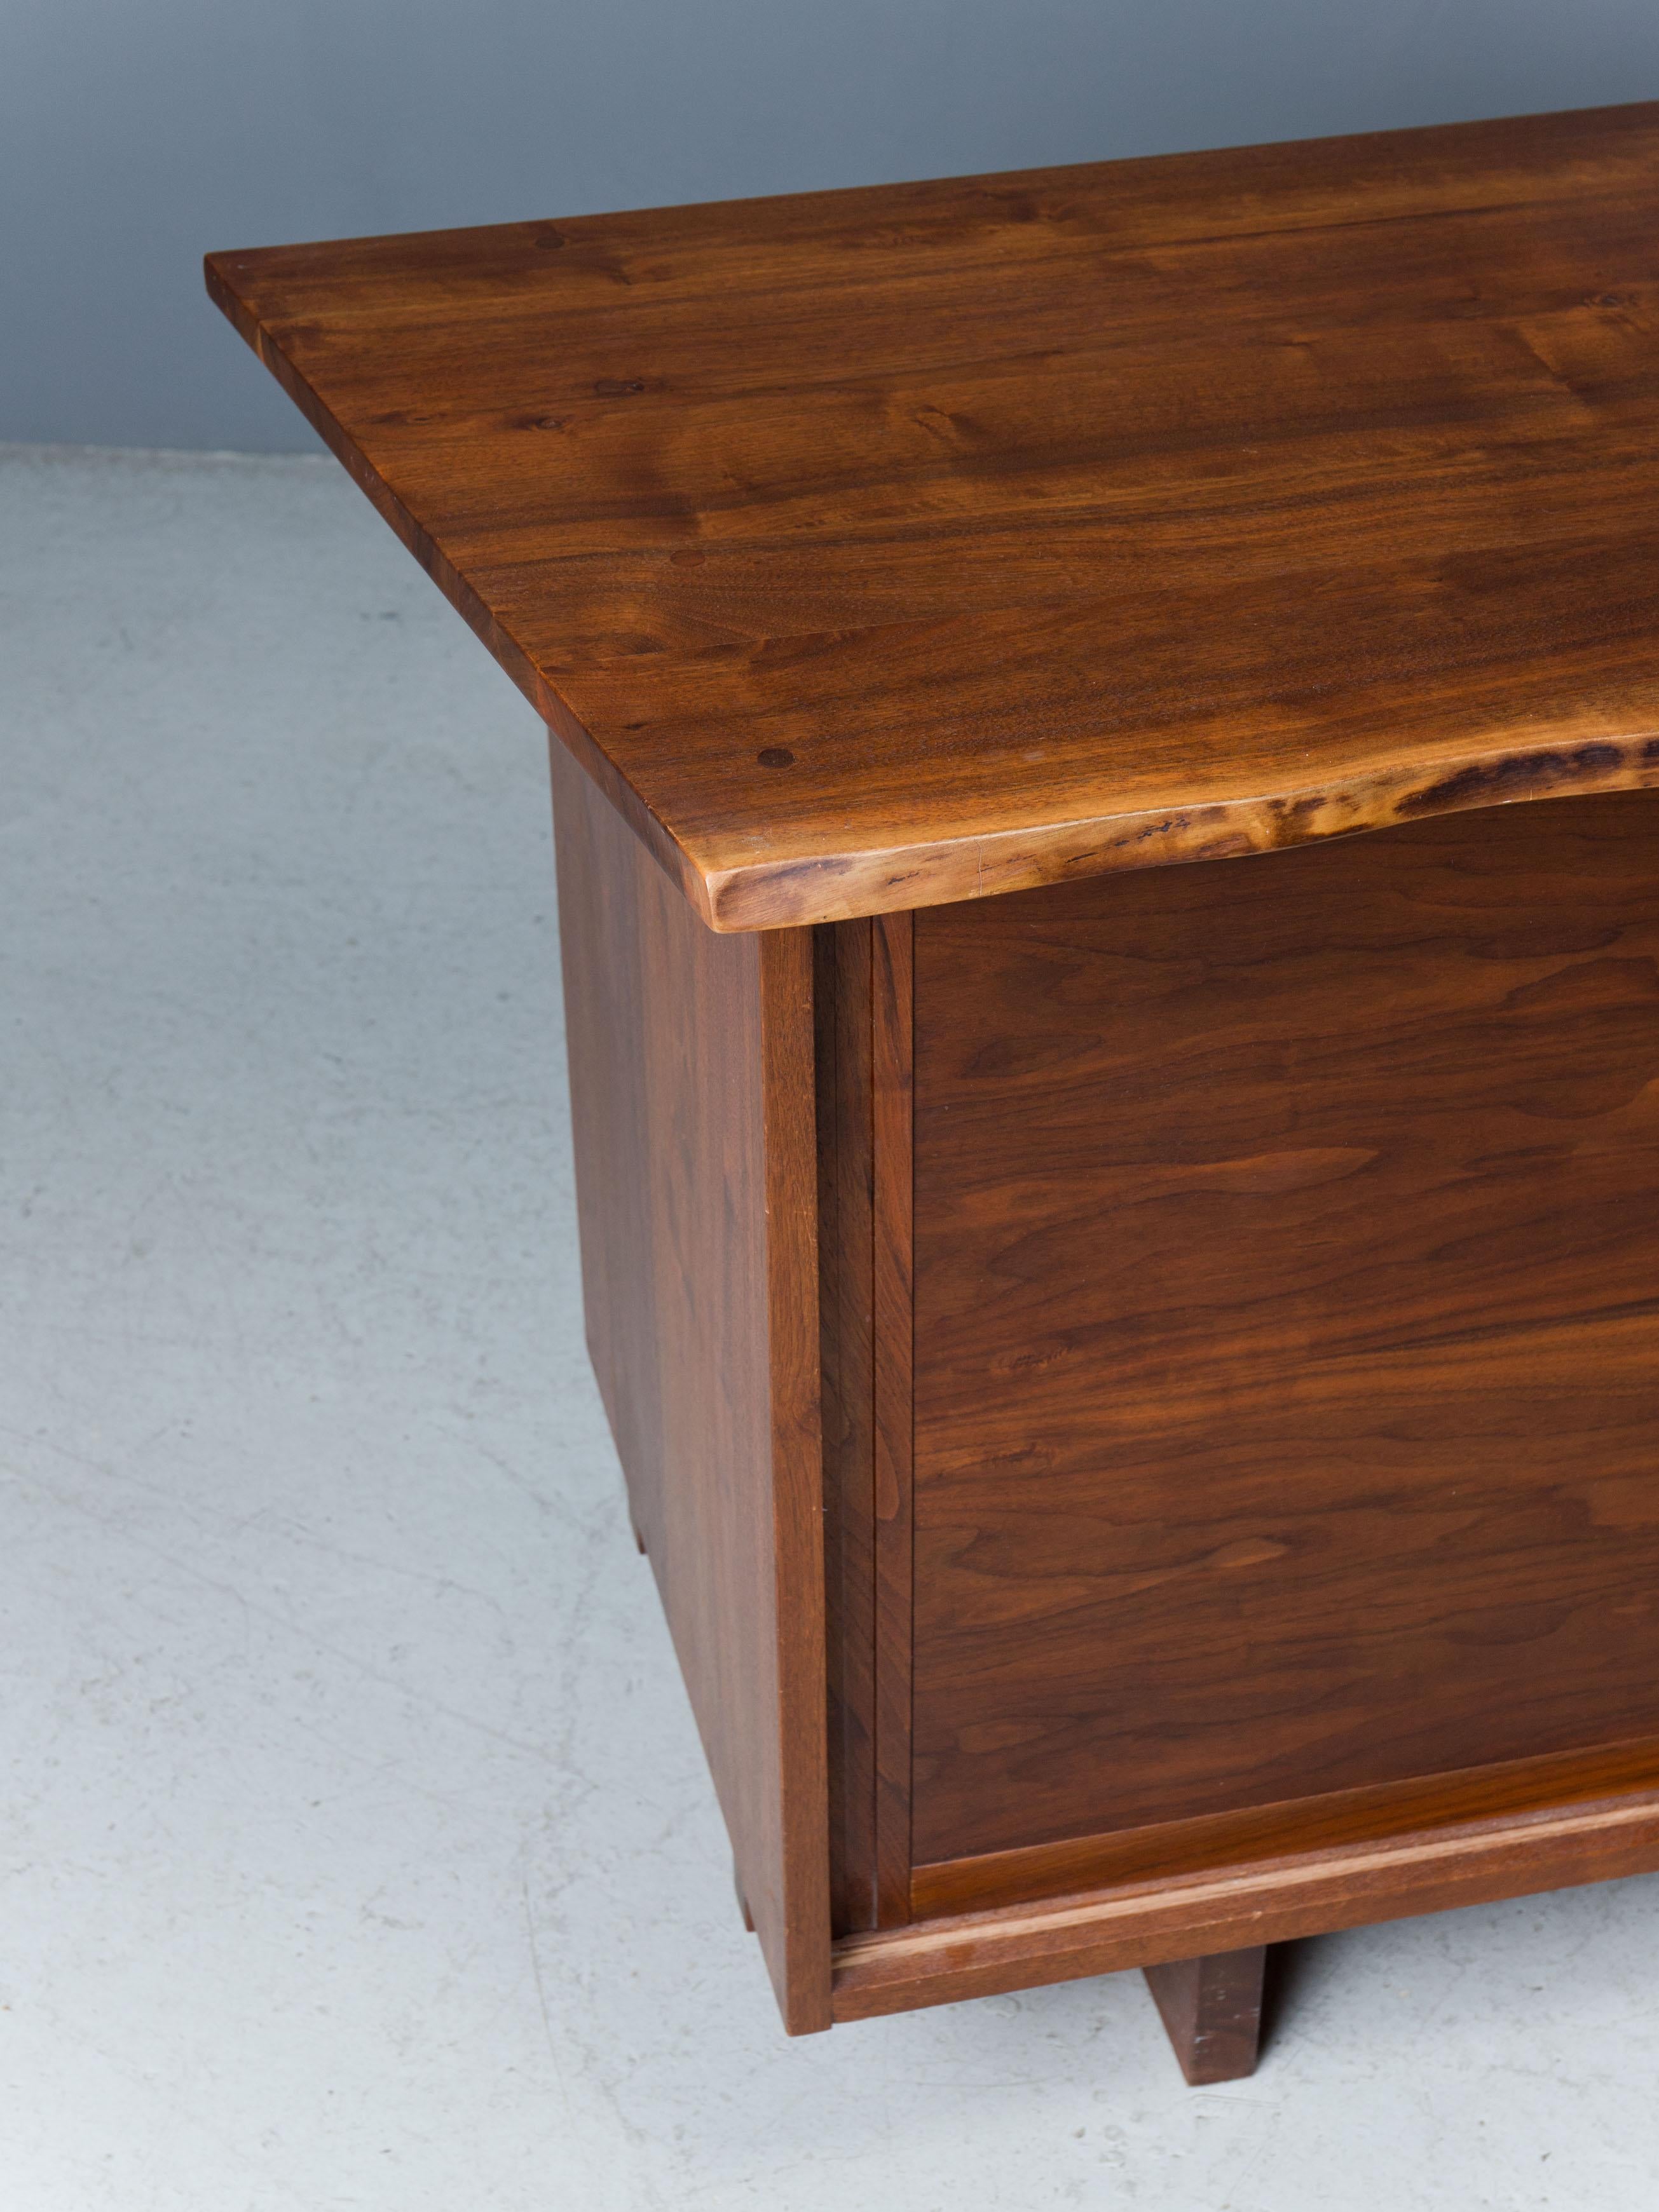 Cabinet features expressive American black walnut top with overhang
and free edge, two sliding doors concealing eight drawers.

Sold with a digital copy of the original order card.